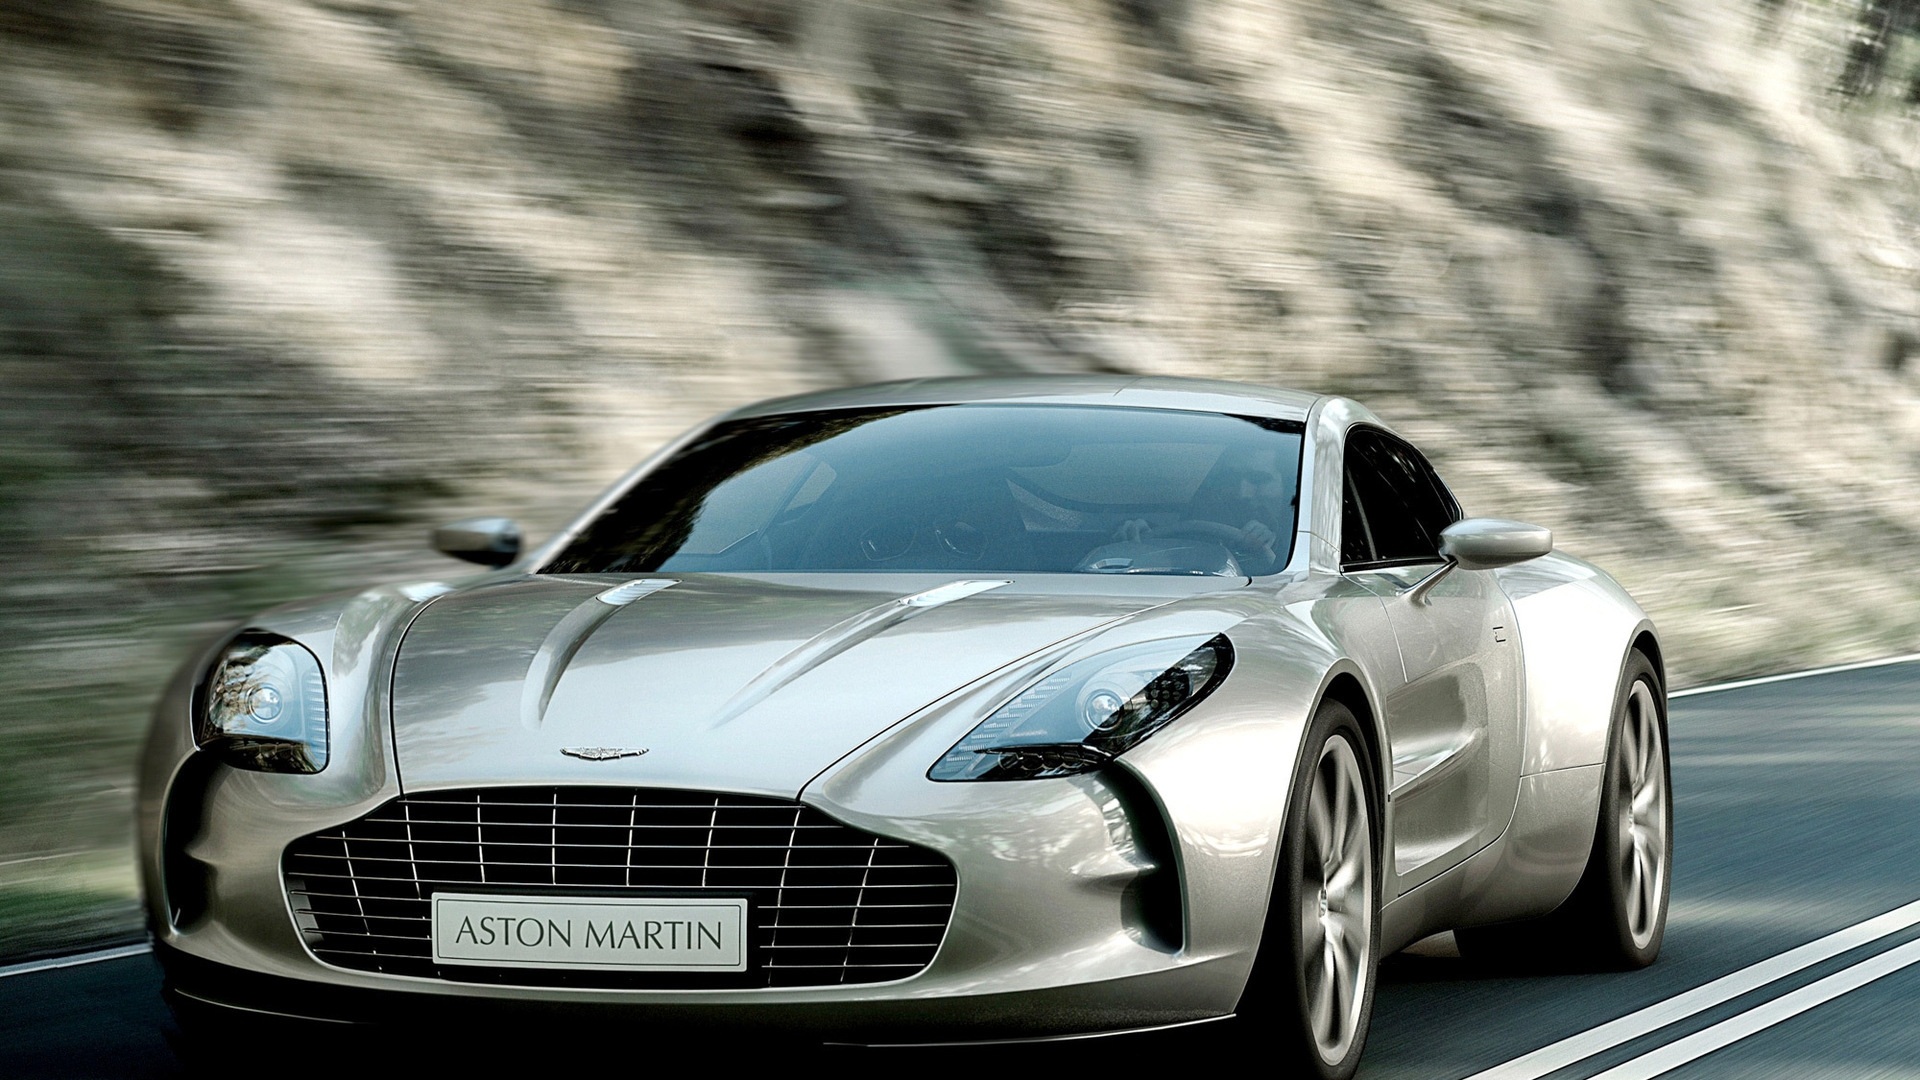 Superb Aston Martin Coupe for 1920 x 1080 HDTV 1080p resolution